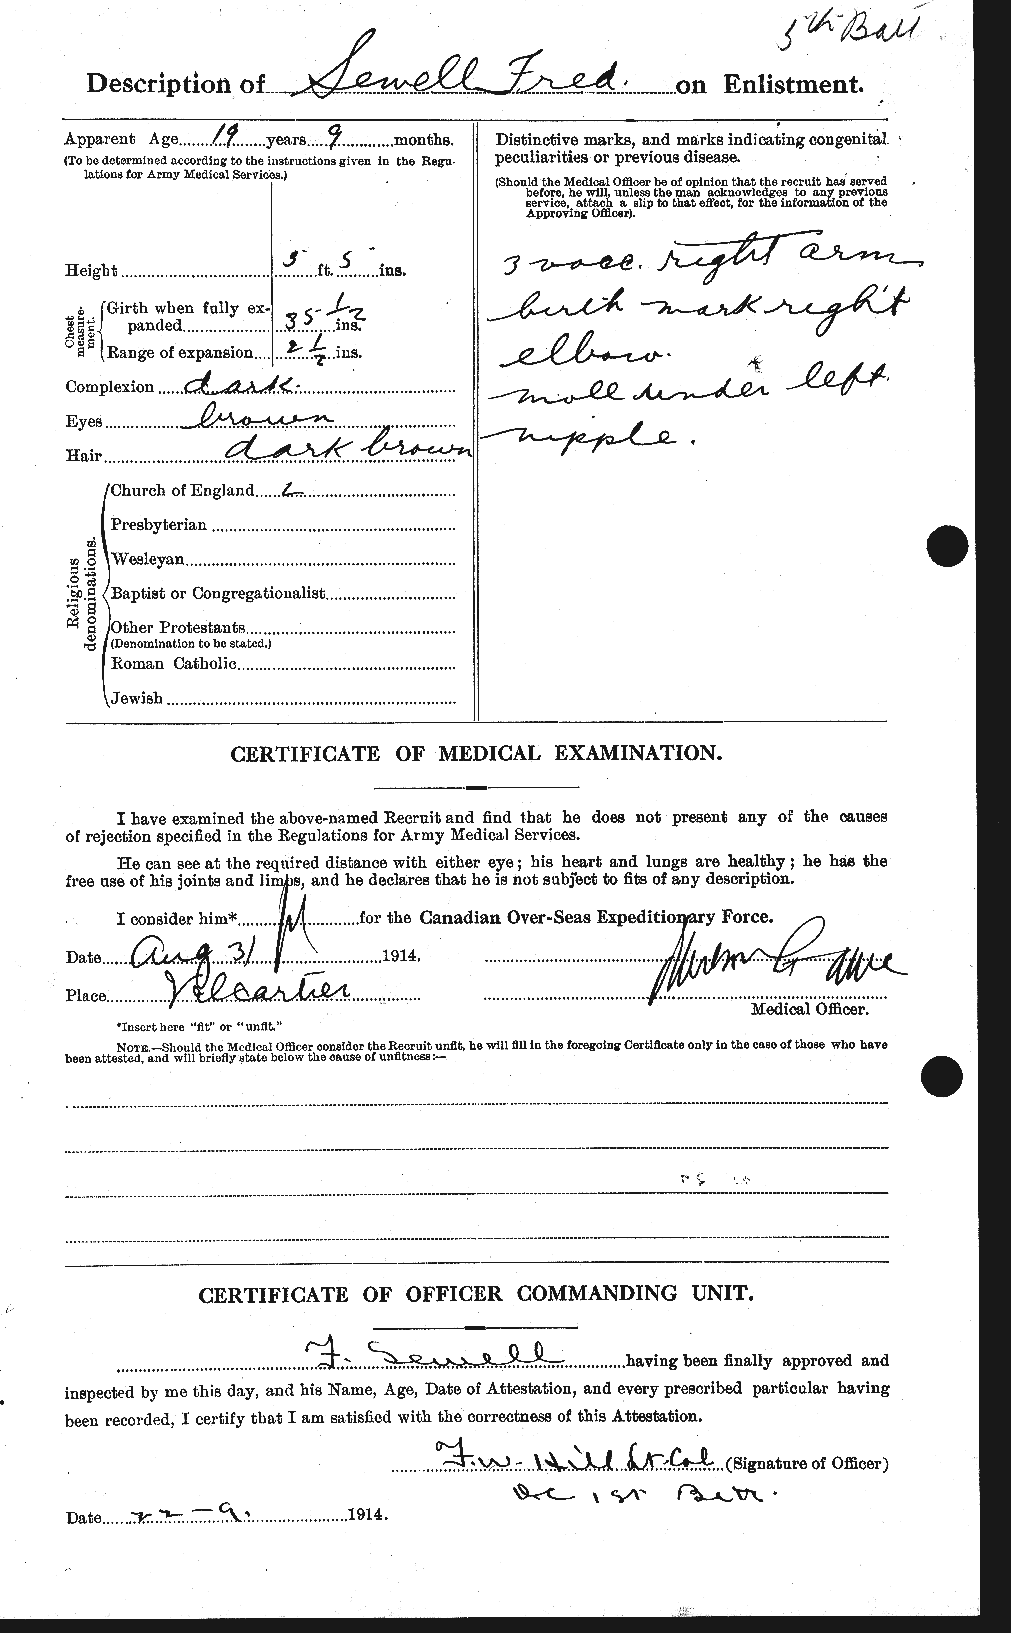 Personnel Records of the First World War - CEF 089980b